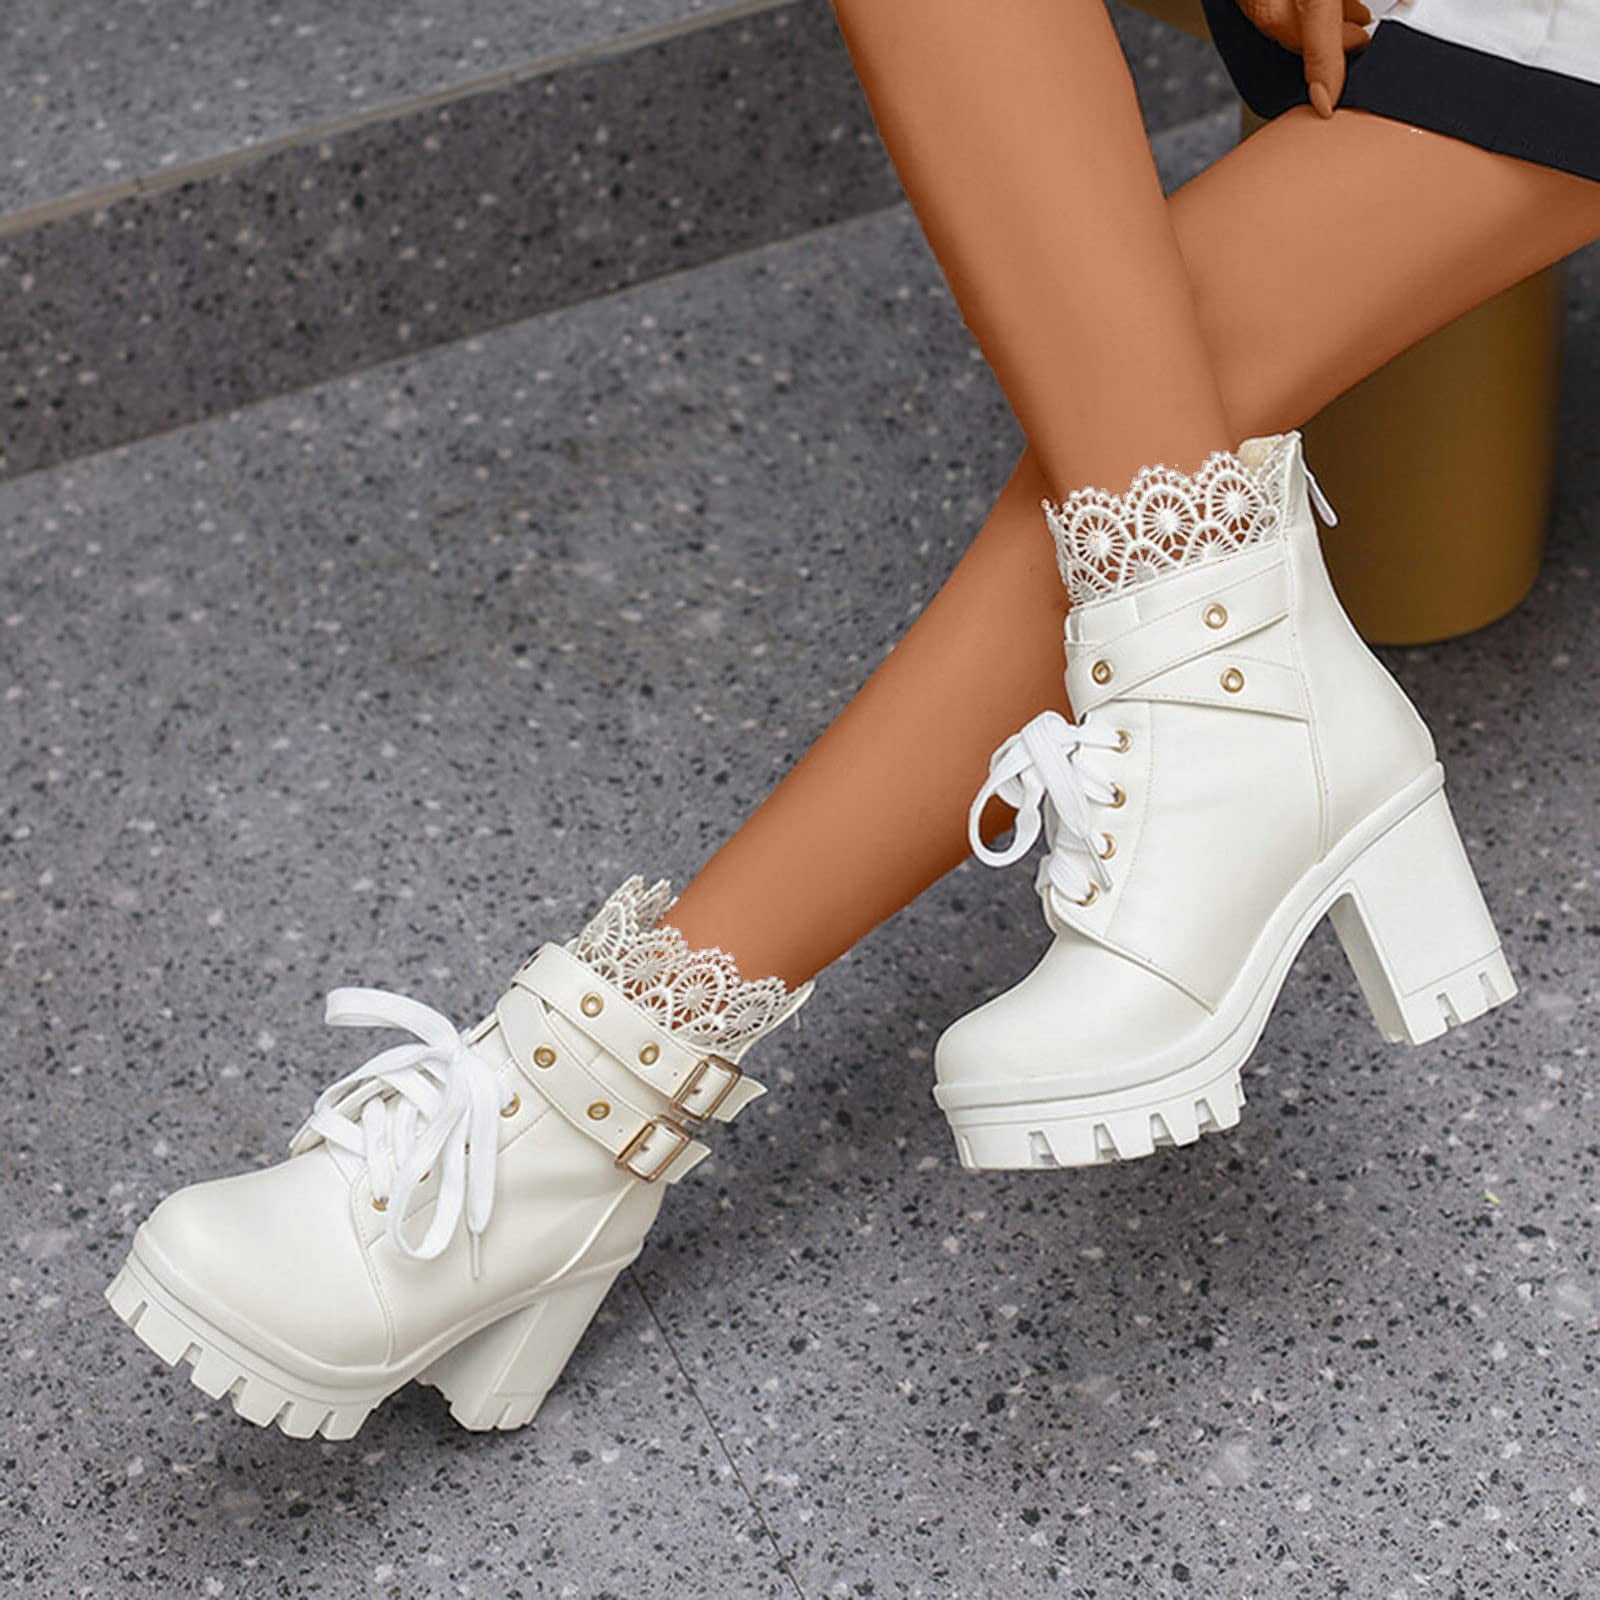 RSXSES Women's Fashion White Ankle Boots Pointed Toe Chunky High Heels Sz6  | eBay